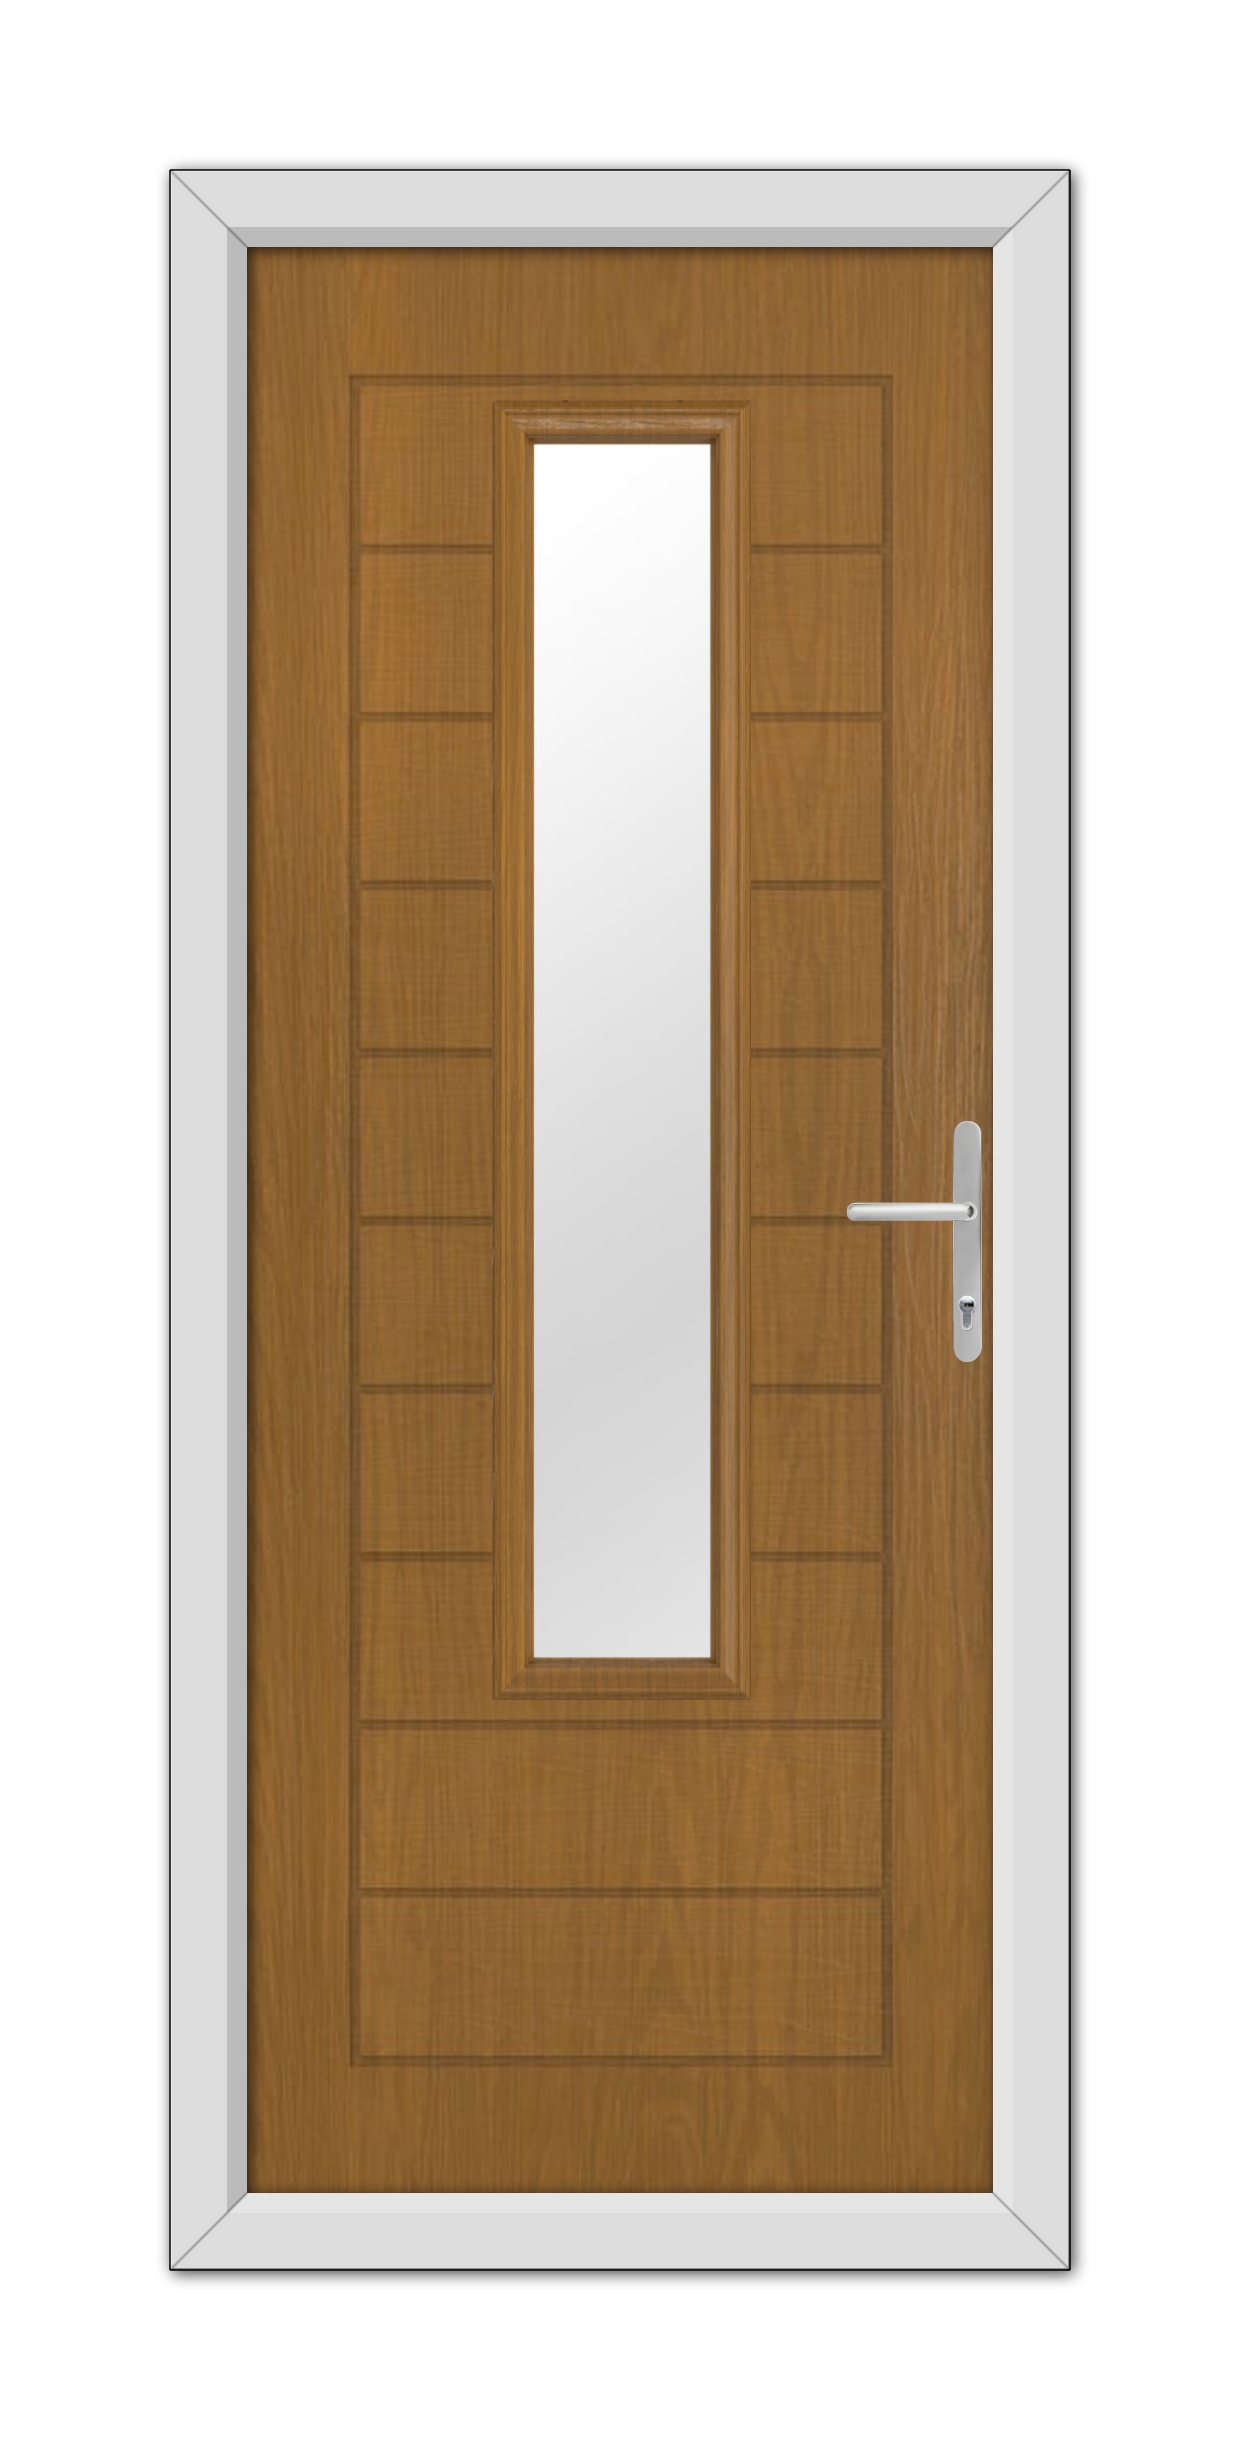 A Oak Bedford Composite Door 48mm Timber Core with a vertical glass panel and a metal handle, framed by a white door frame.